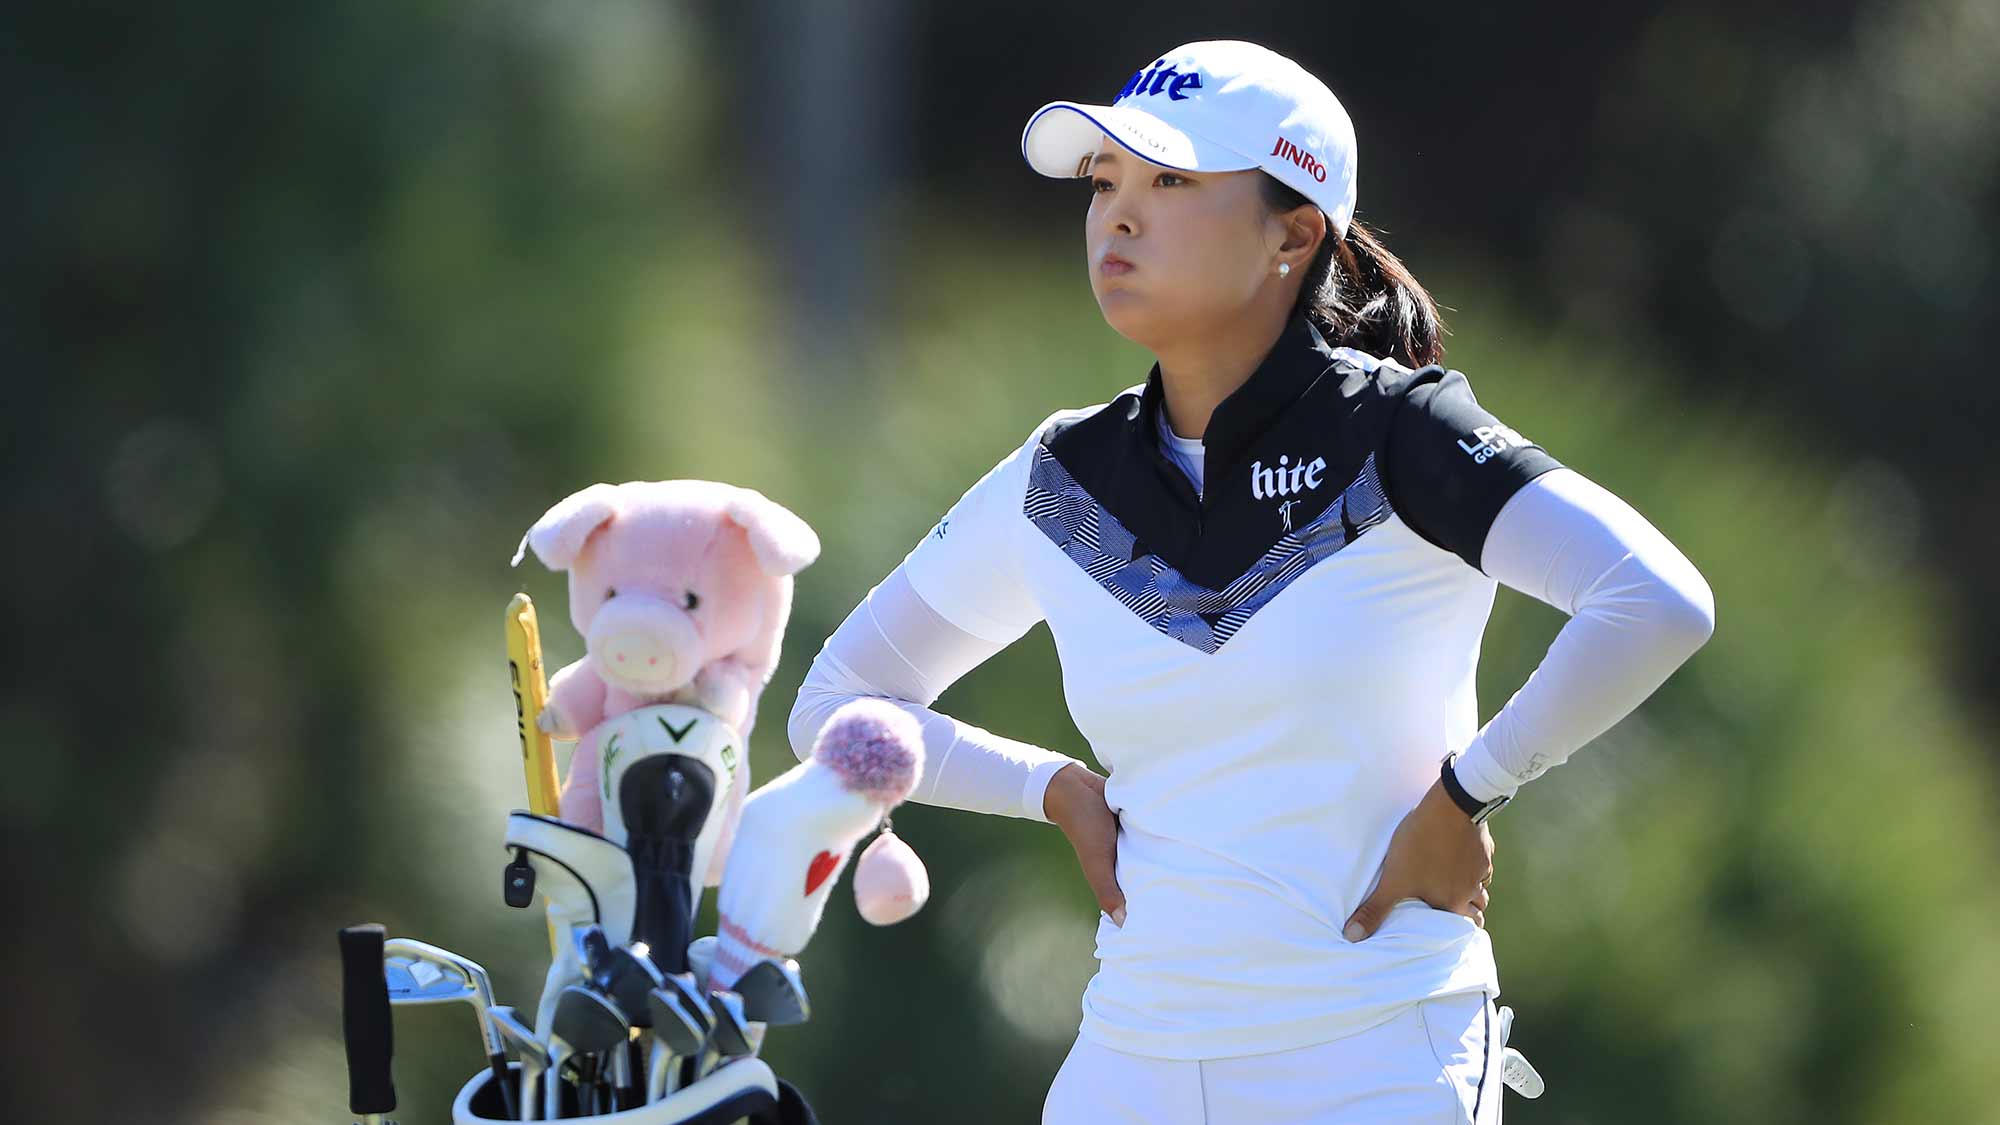 Jin Young Ko of Korea looks on after playing her shot from the third tee during the first round of the CME Group Tour Championship at Tiburon Golf Club on November 21, 2019 in Naples, Florida